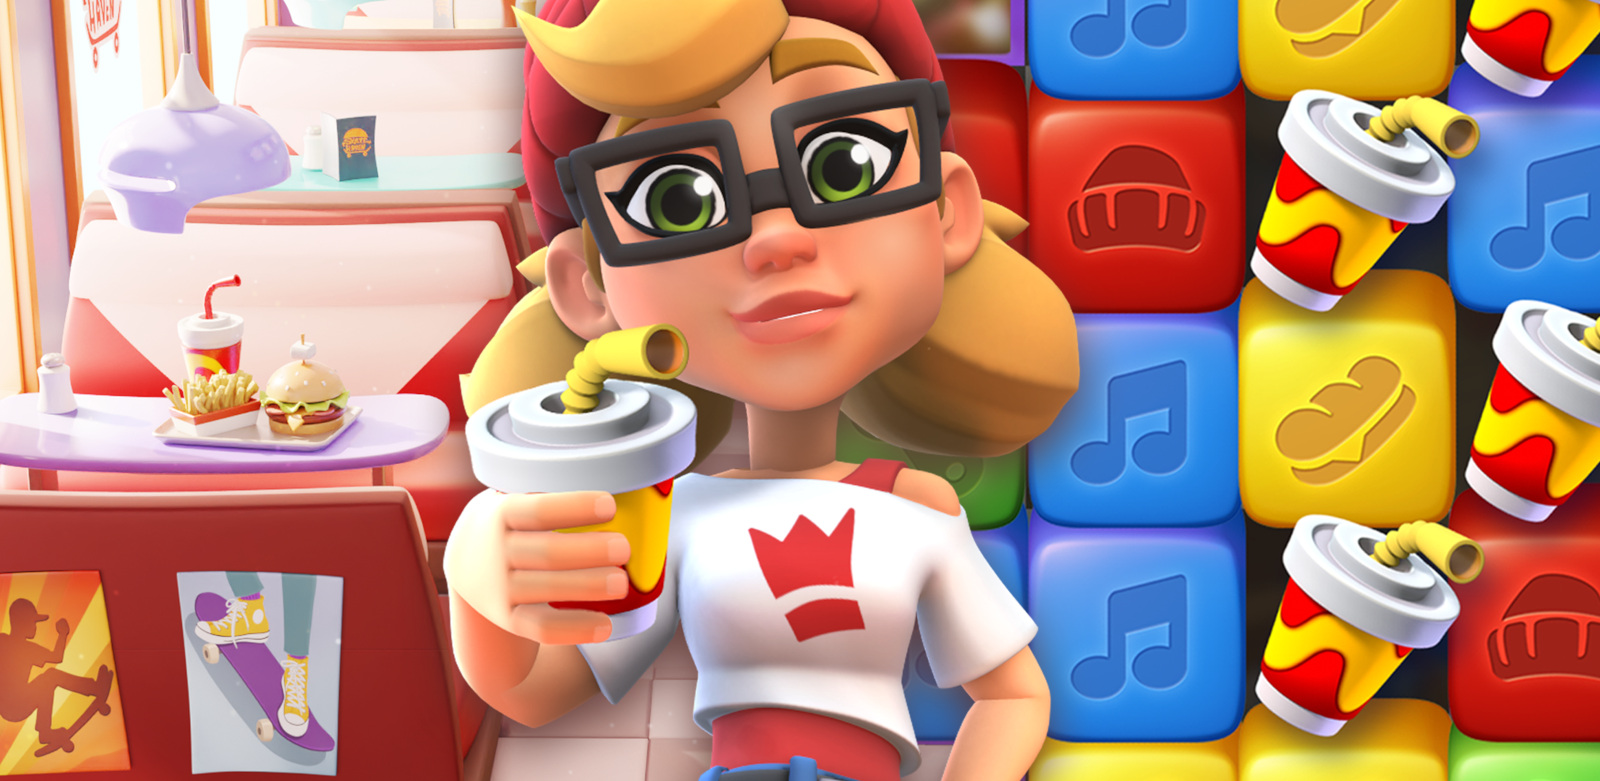 Subway Surfers Copenhagen - Play Free Game Online at